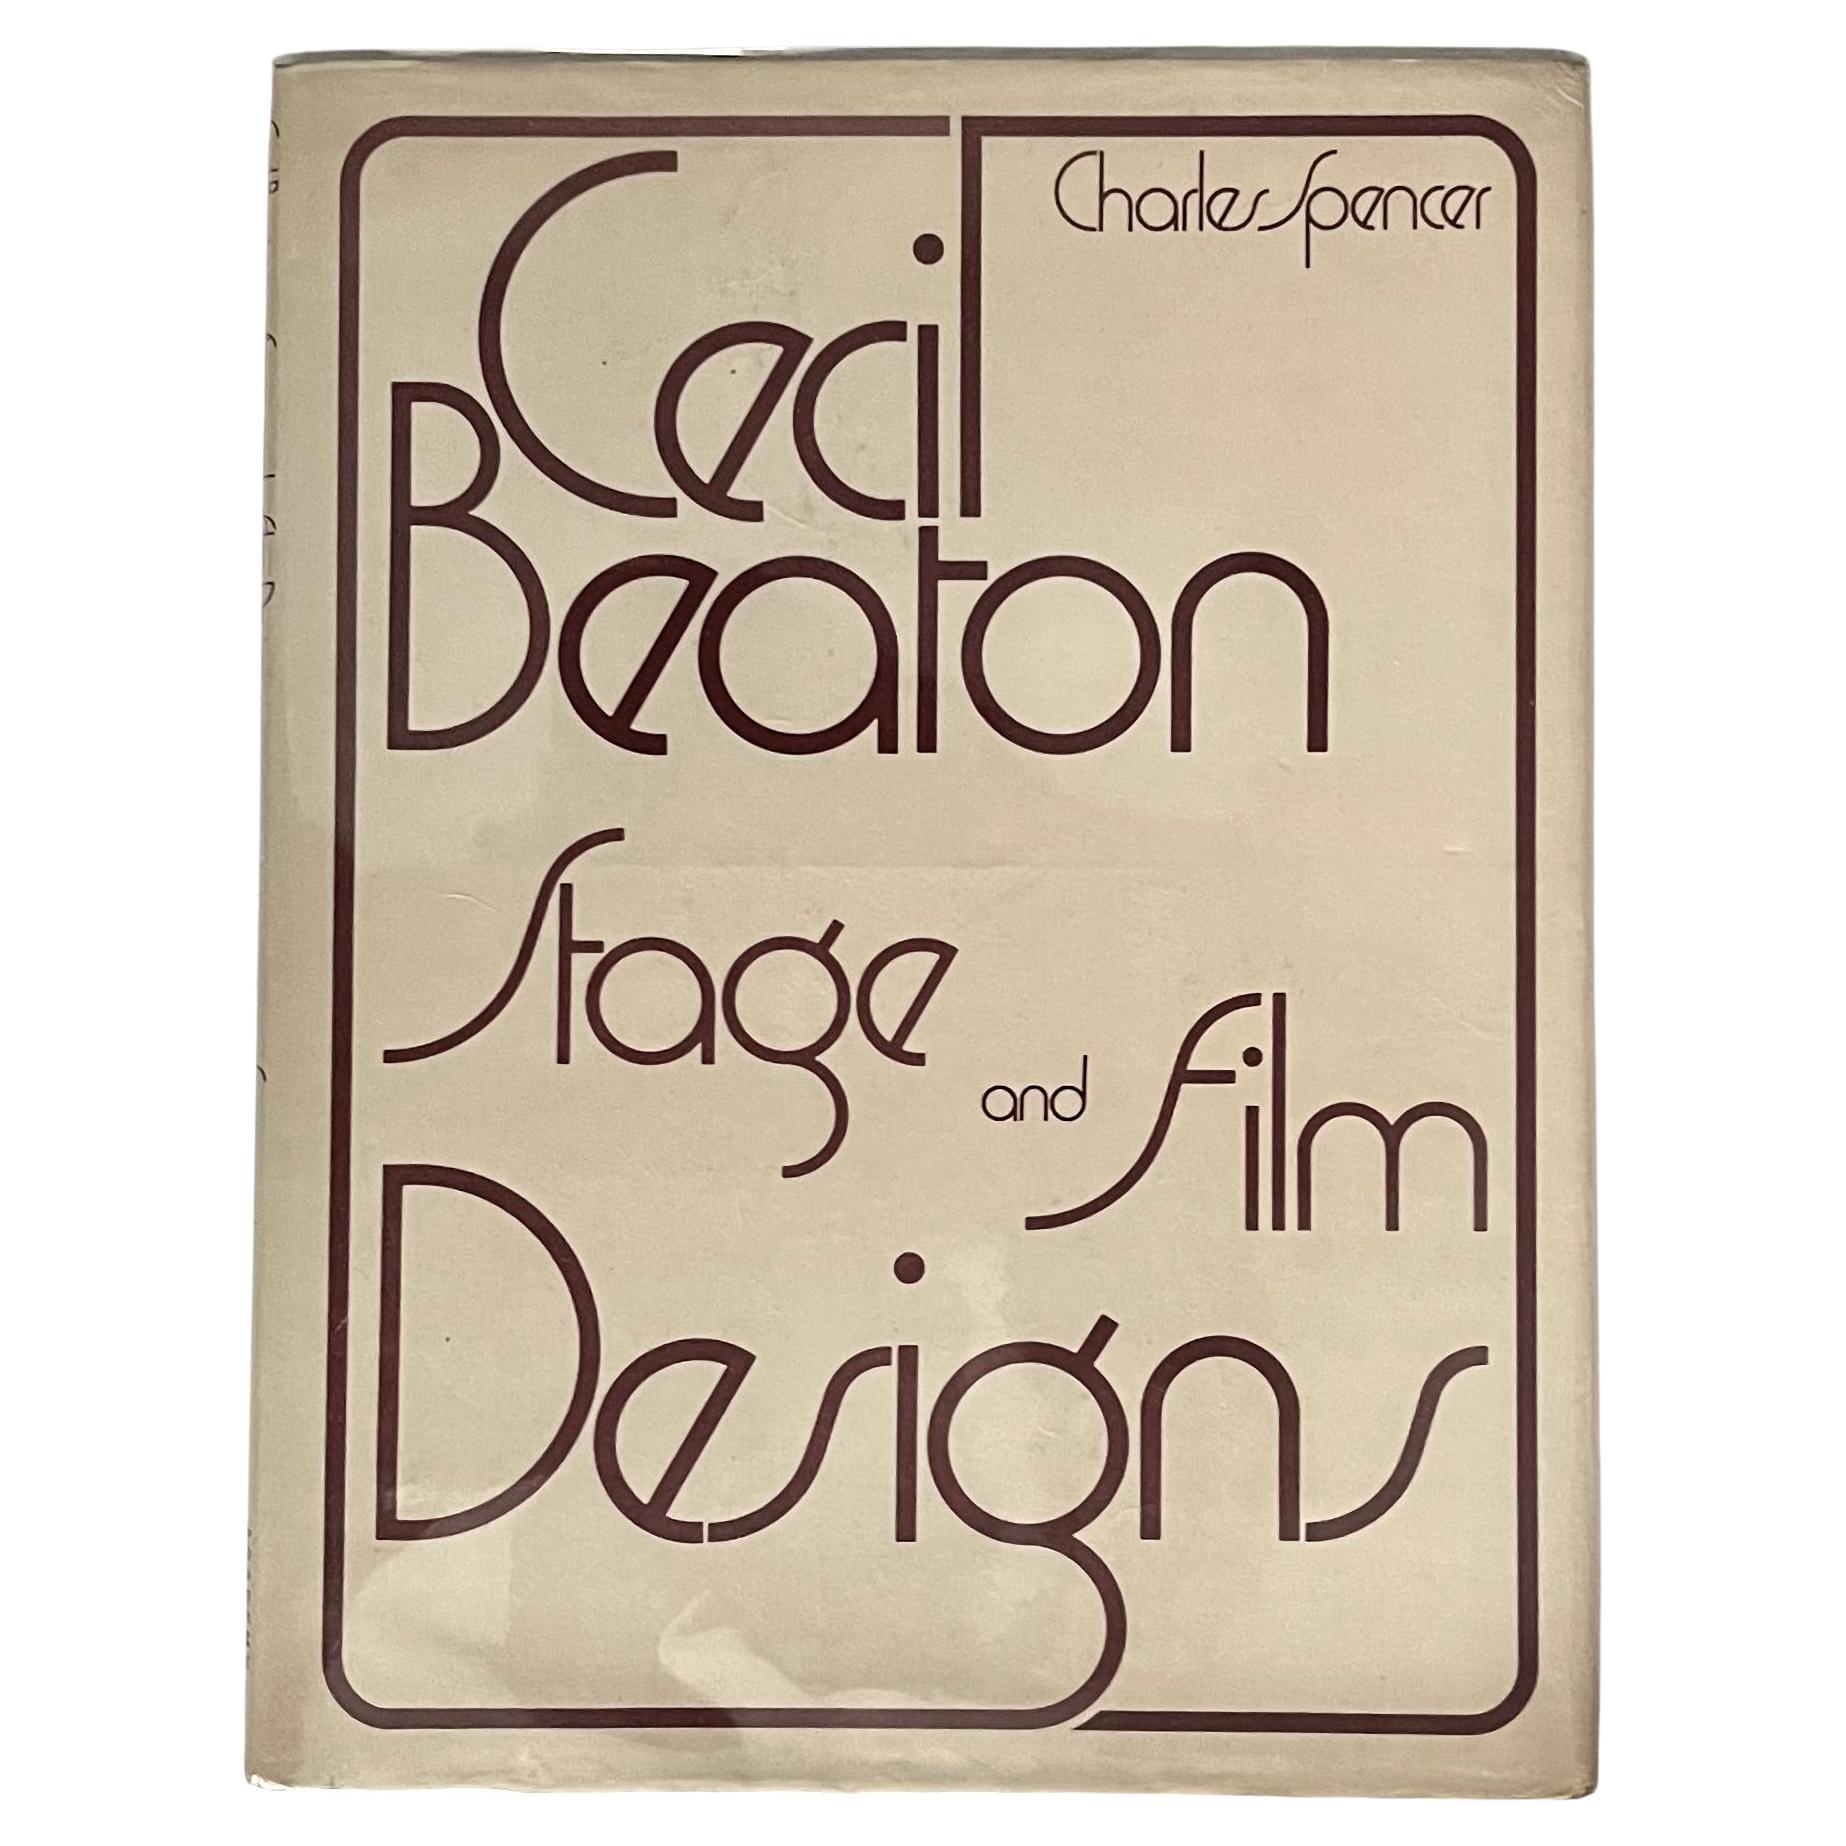 Cecil Beaton Stage and Film Designs - Charles Spencer - 1st edition,  1975 For Sale